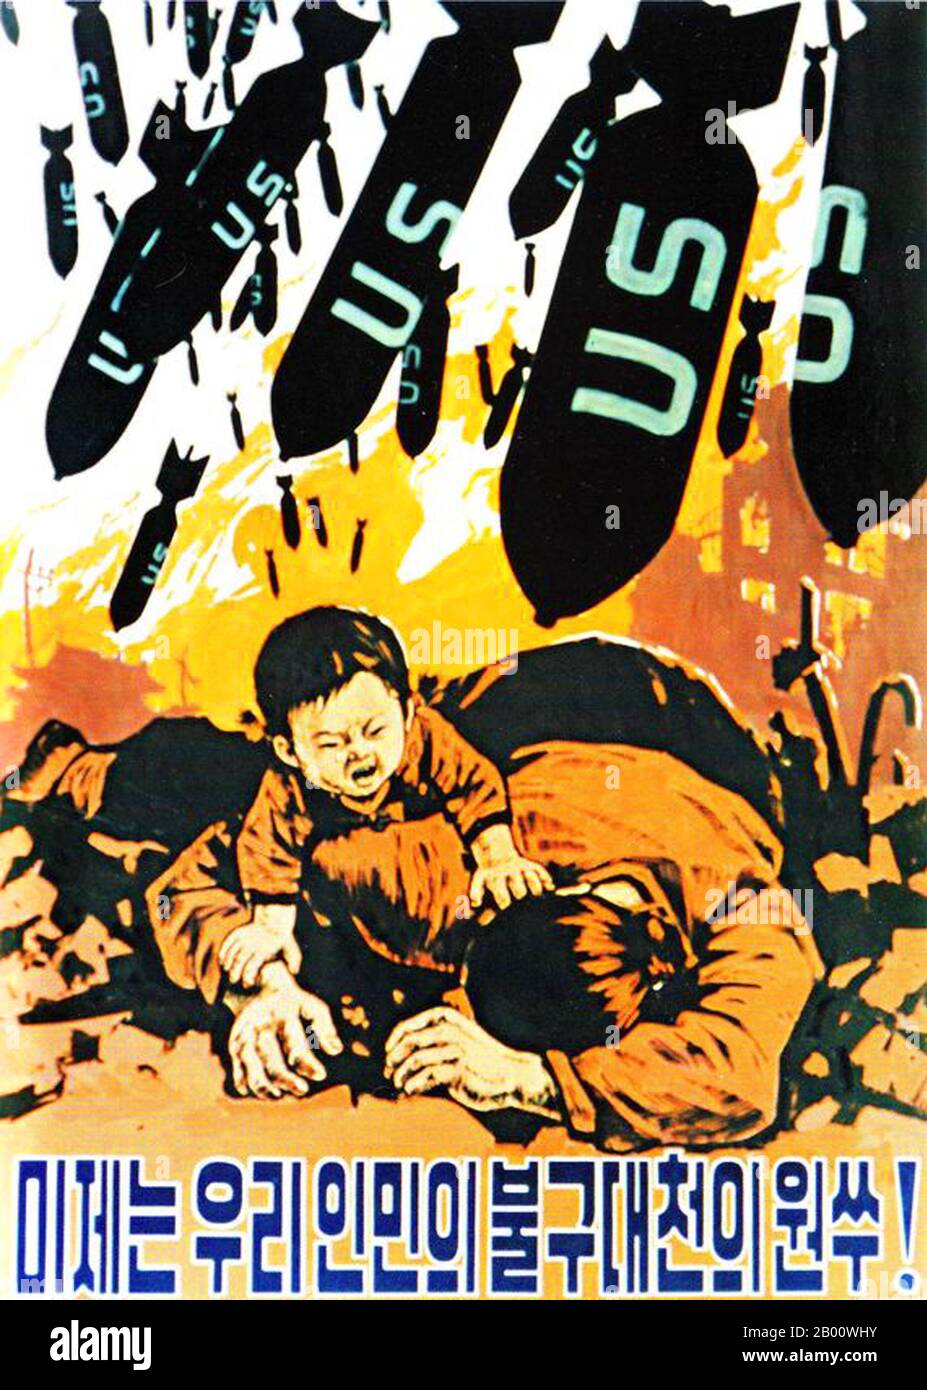 Korea: North Korean (DPRK) propaganda poster: American imperialists are the enemies of our people!  Socialist realism is a style of realistic art which developed under Socialism in the Soviet Union and became a dominant style in other communist countries. Socialist realism is a teleologically-oriented style having as its purpose the furtherance of the goals of socialism and communism. Although related, it should not be confused with Social realism, a type of art that realistically depicts subjects of social concern. Stock Photo